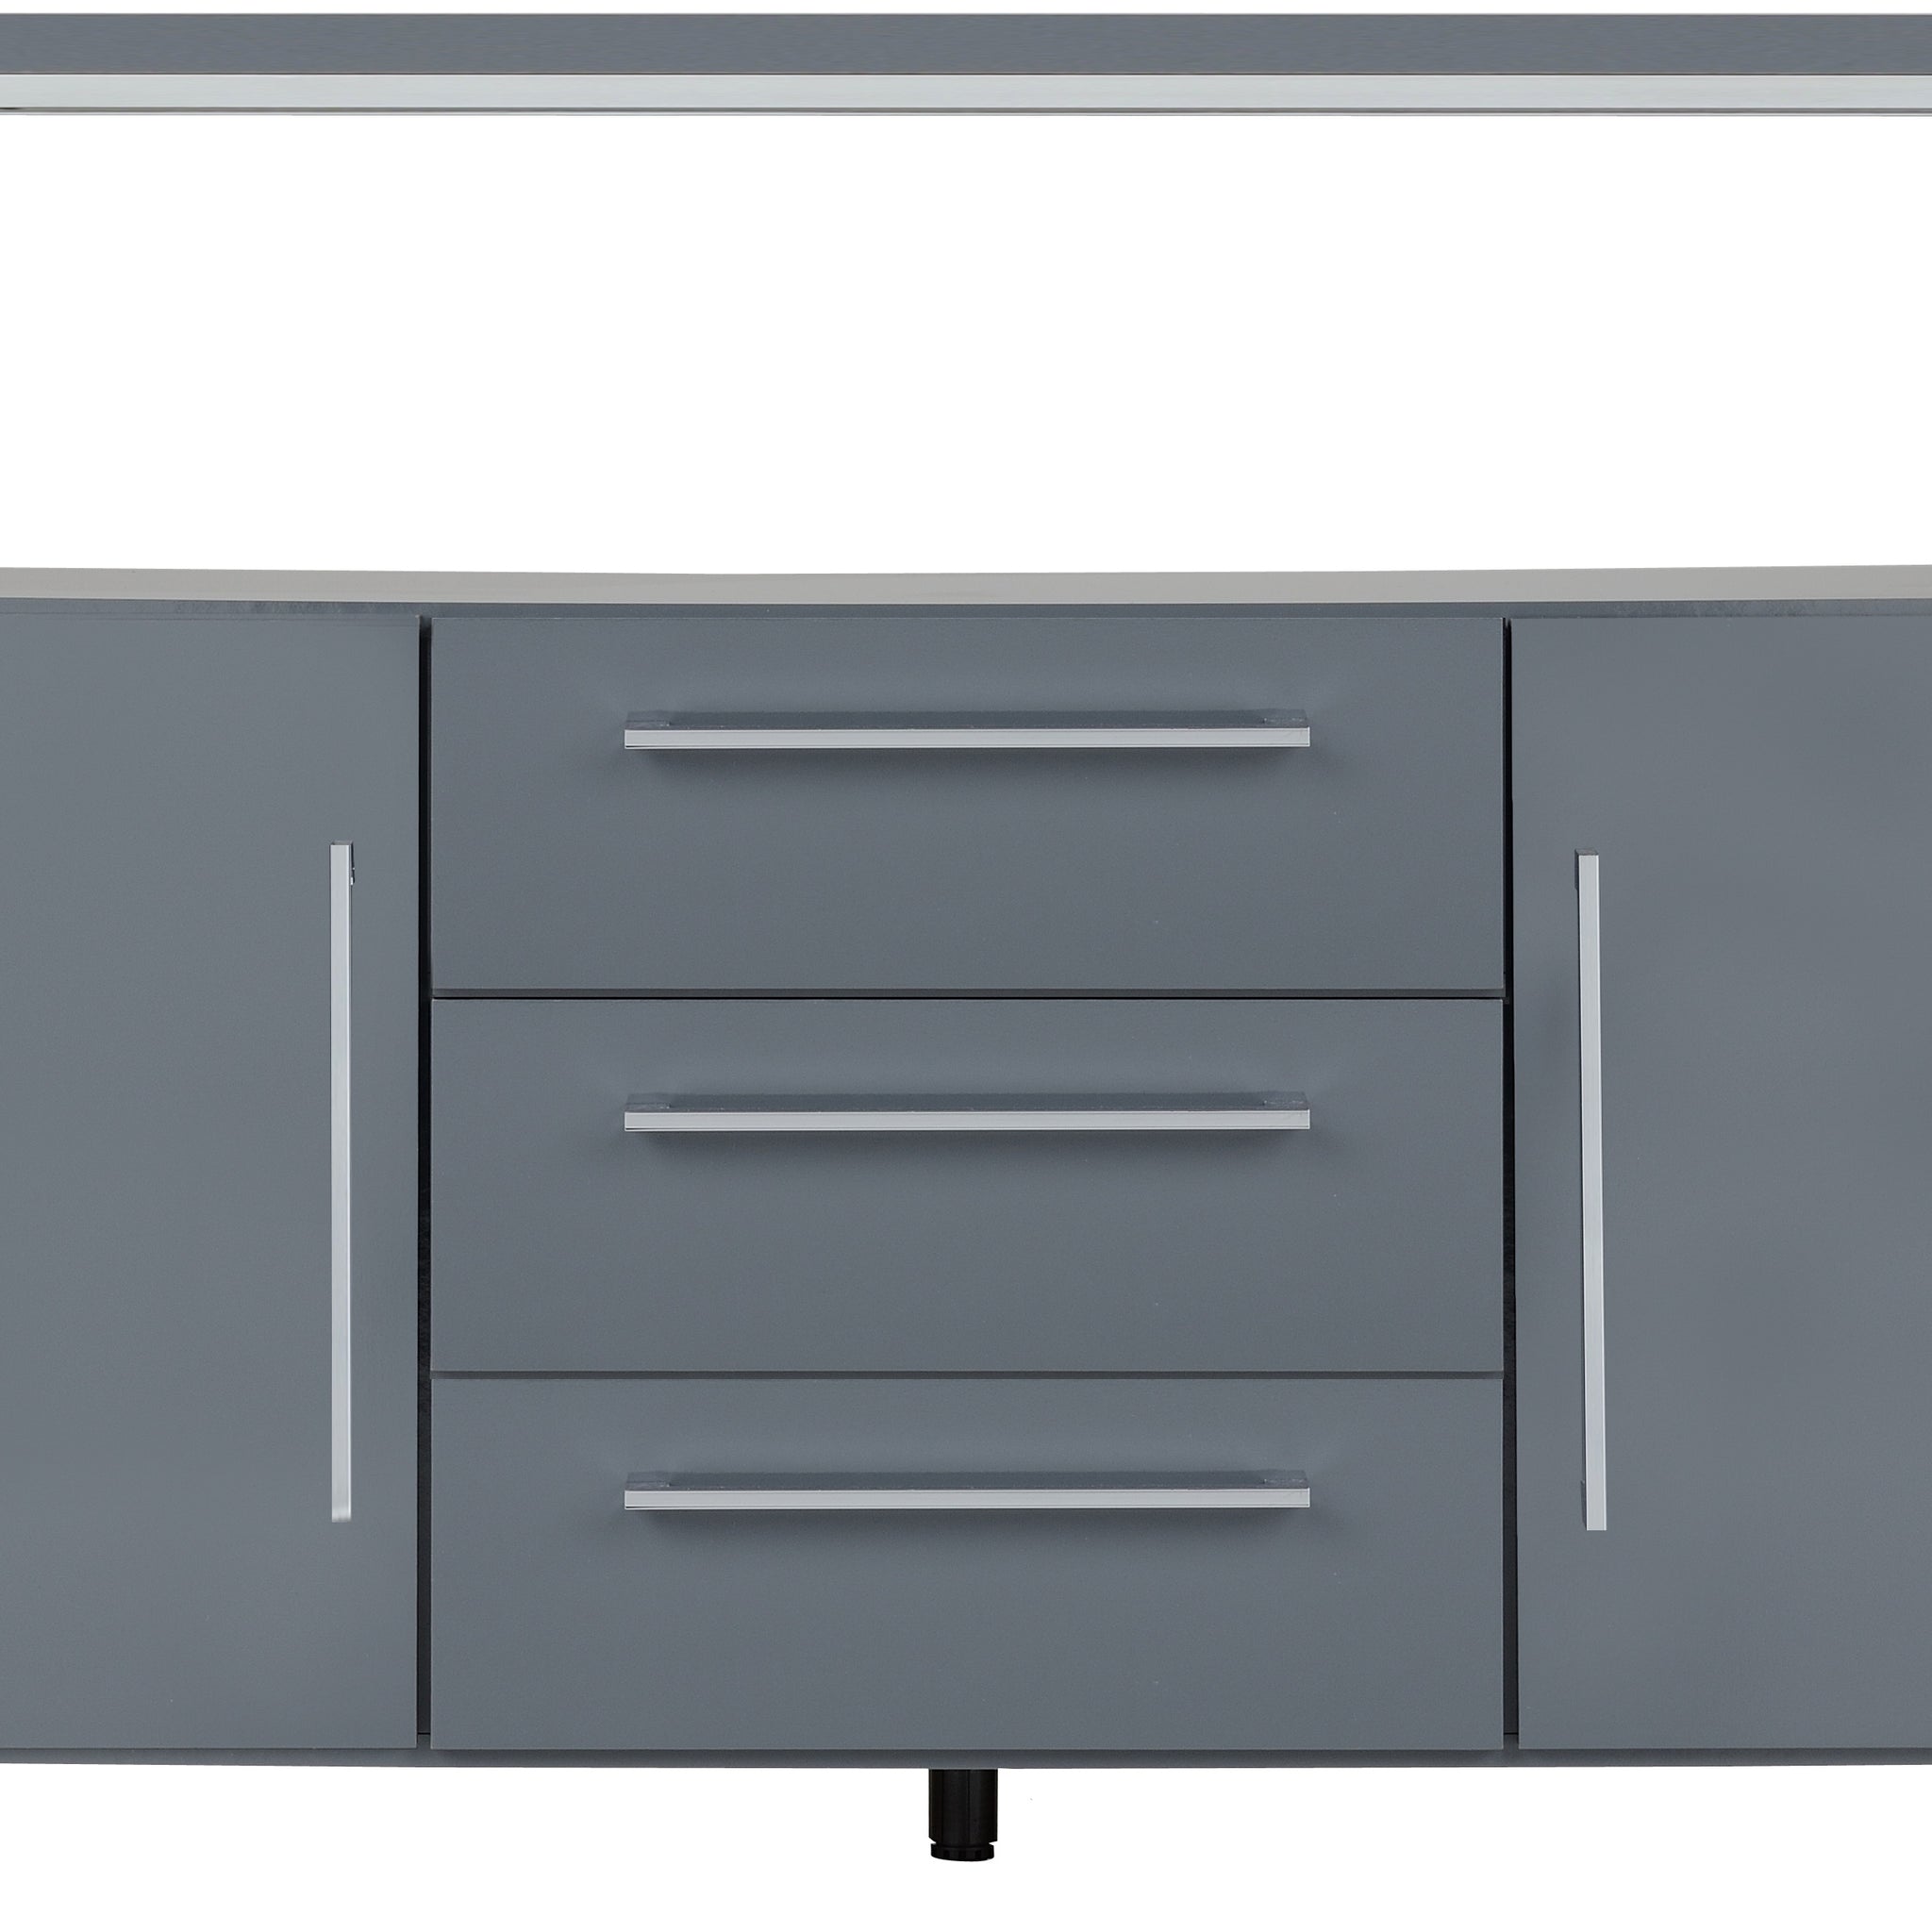 Charisma Sideboard - Grey Gloss/Chrome - The Right Buy Store